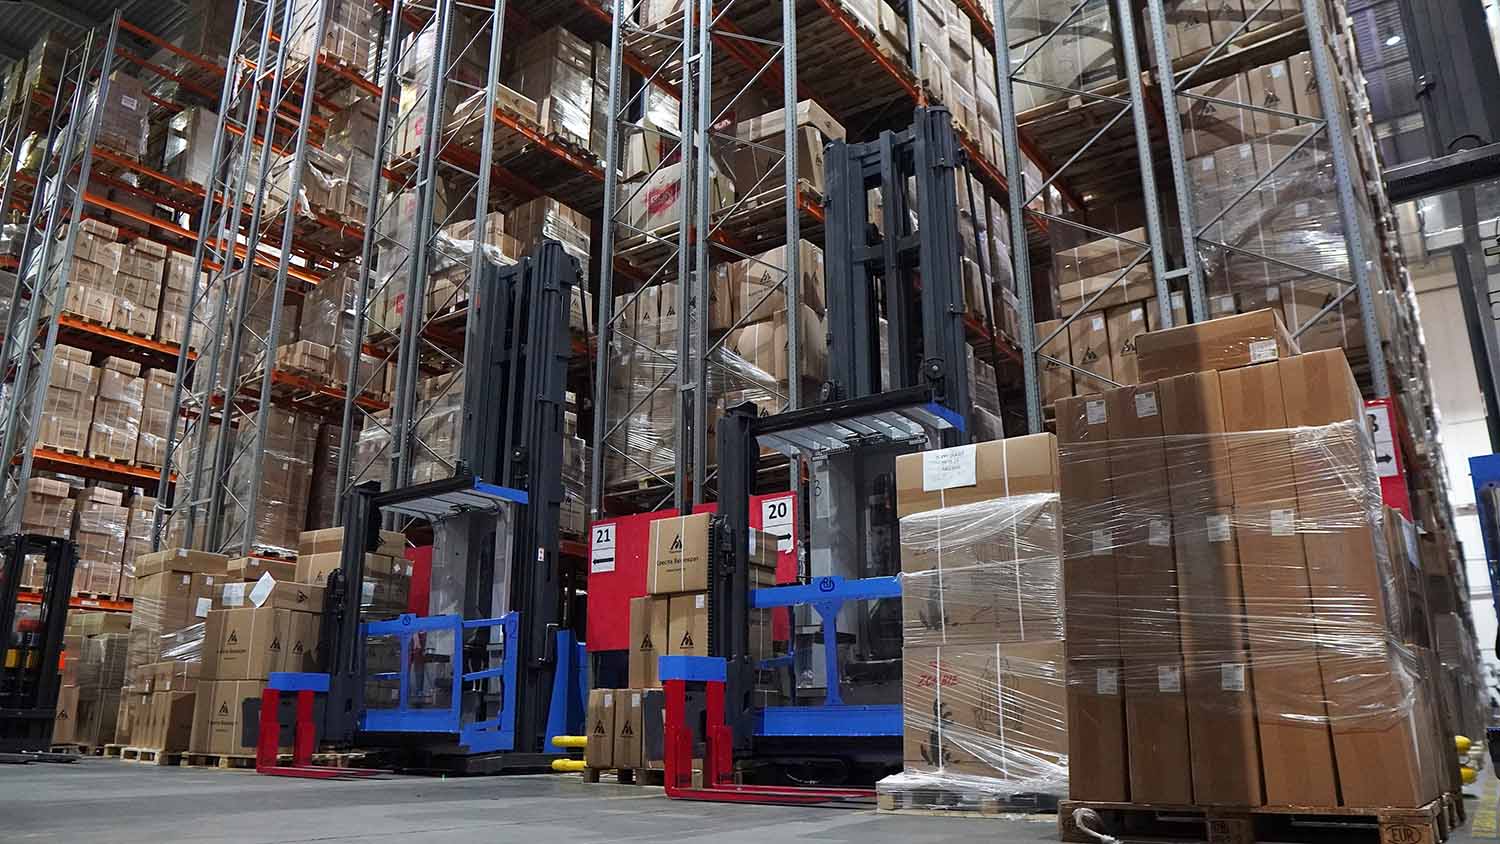 Client Case|Zowell Very Narrow Aisle forklift man up type VUE model helps European head furniture company achieve high density storage